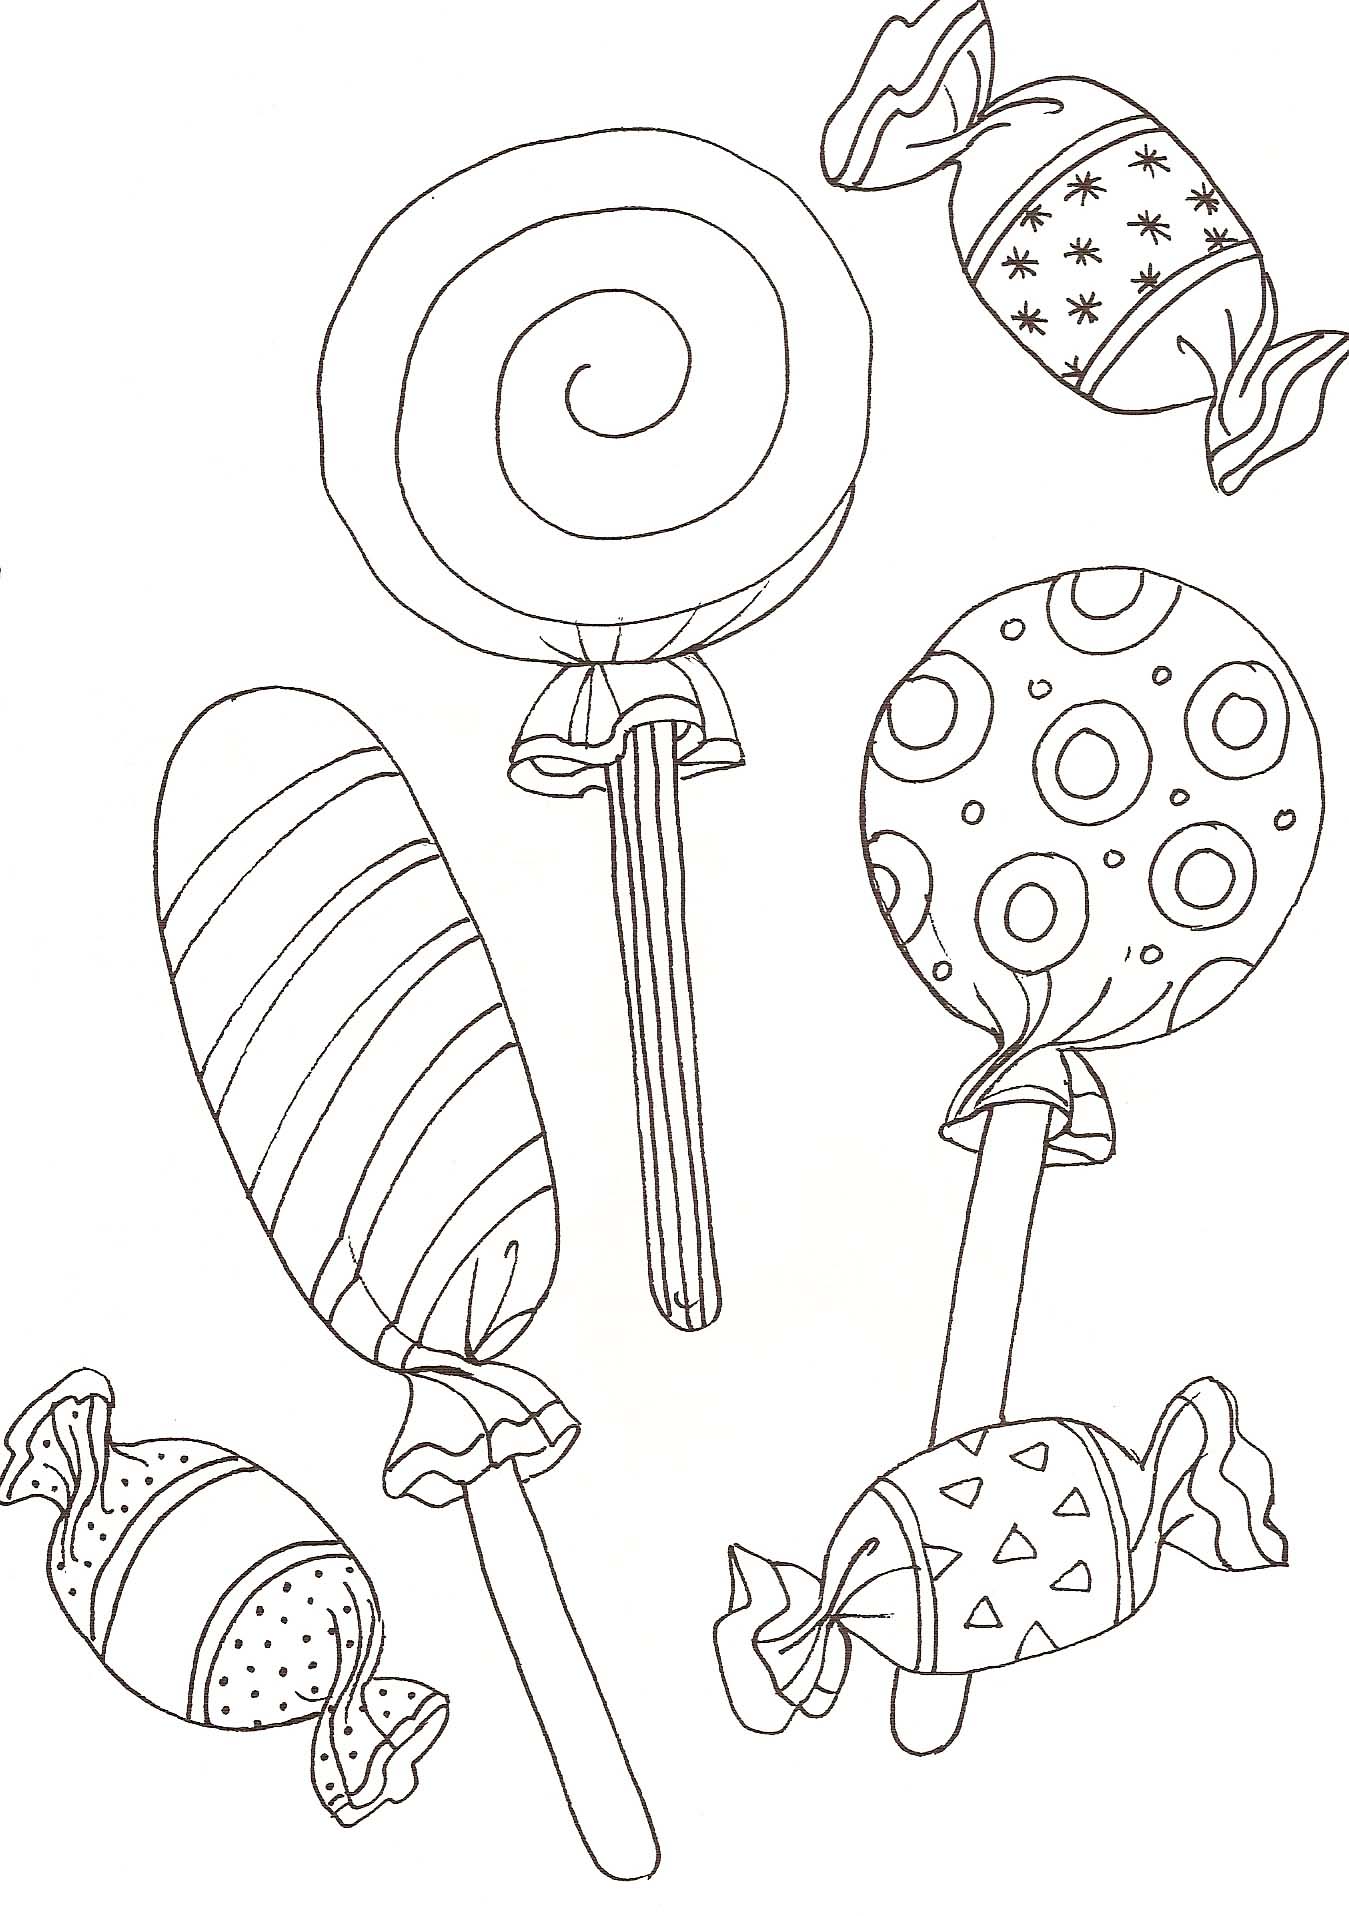 Lollipop Coloring Pages   Best Coloring Pages For Kids